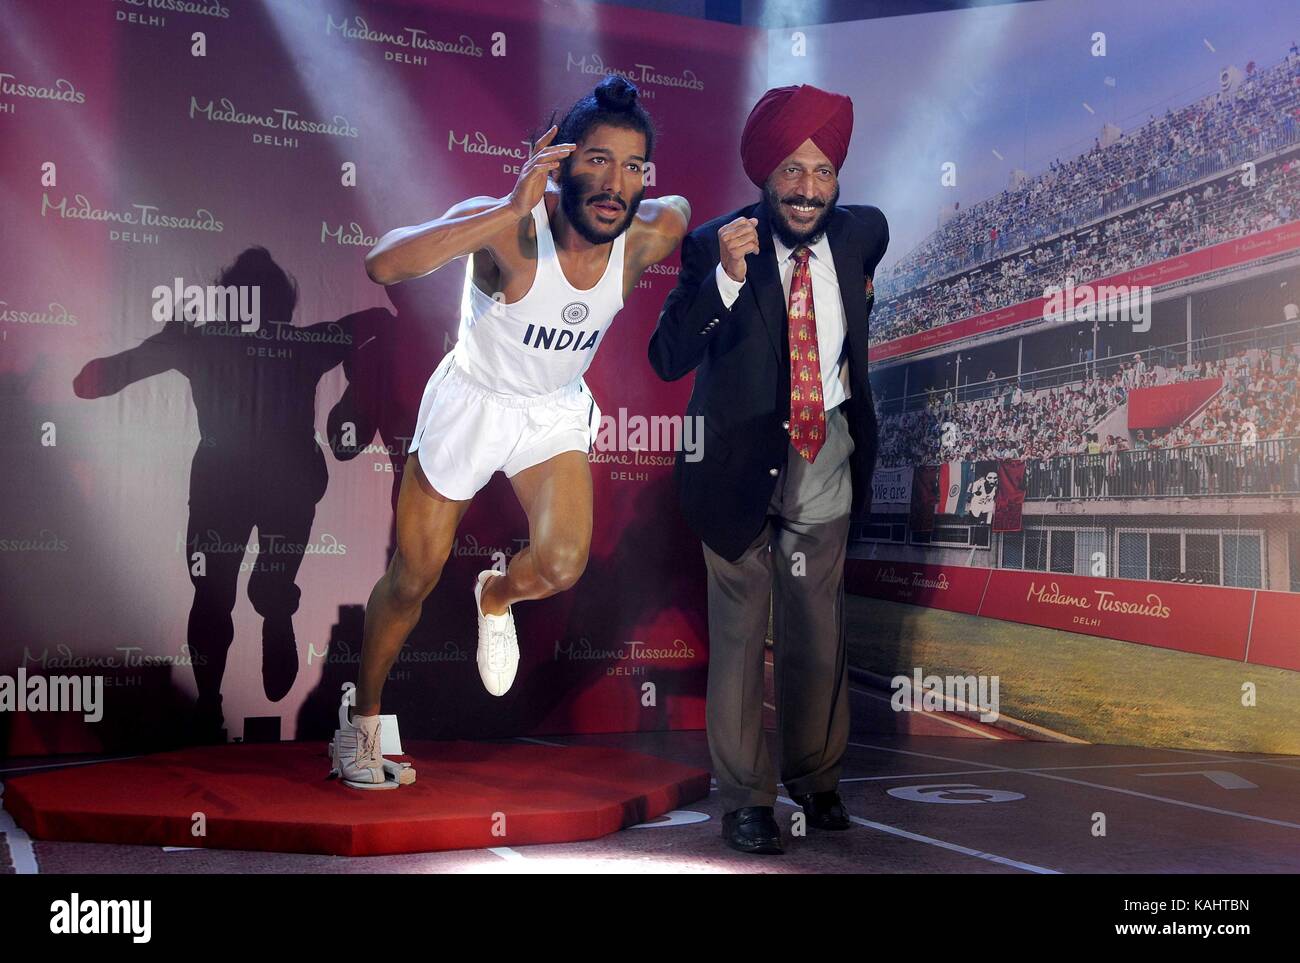 CHANDIGARH, INDIA - SEPTEMBER 26: Legendary athlete Milkha Singh unveiling his wax statue for Madame Tussauds museum on September 26, 2017 in Chandigarh, India. Milkha Singh was the country's first athlete to win gold in the Commonwealth Games (1958 Cardiff) and missed a medal at 1960 Rome Olympic medal by a whisker, finishing fourth in the 400m final. The wax statue of Milkha Singh will share space with Mahatma Gandhi, Prime Minister Narendra Modi, Kapil Dev and Amitabh Bachchan and international celebrities such as Michael Jackson at the Madame Tussauds Delhi museum which will open on Decemb Stock Photo